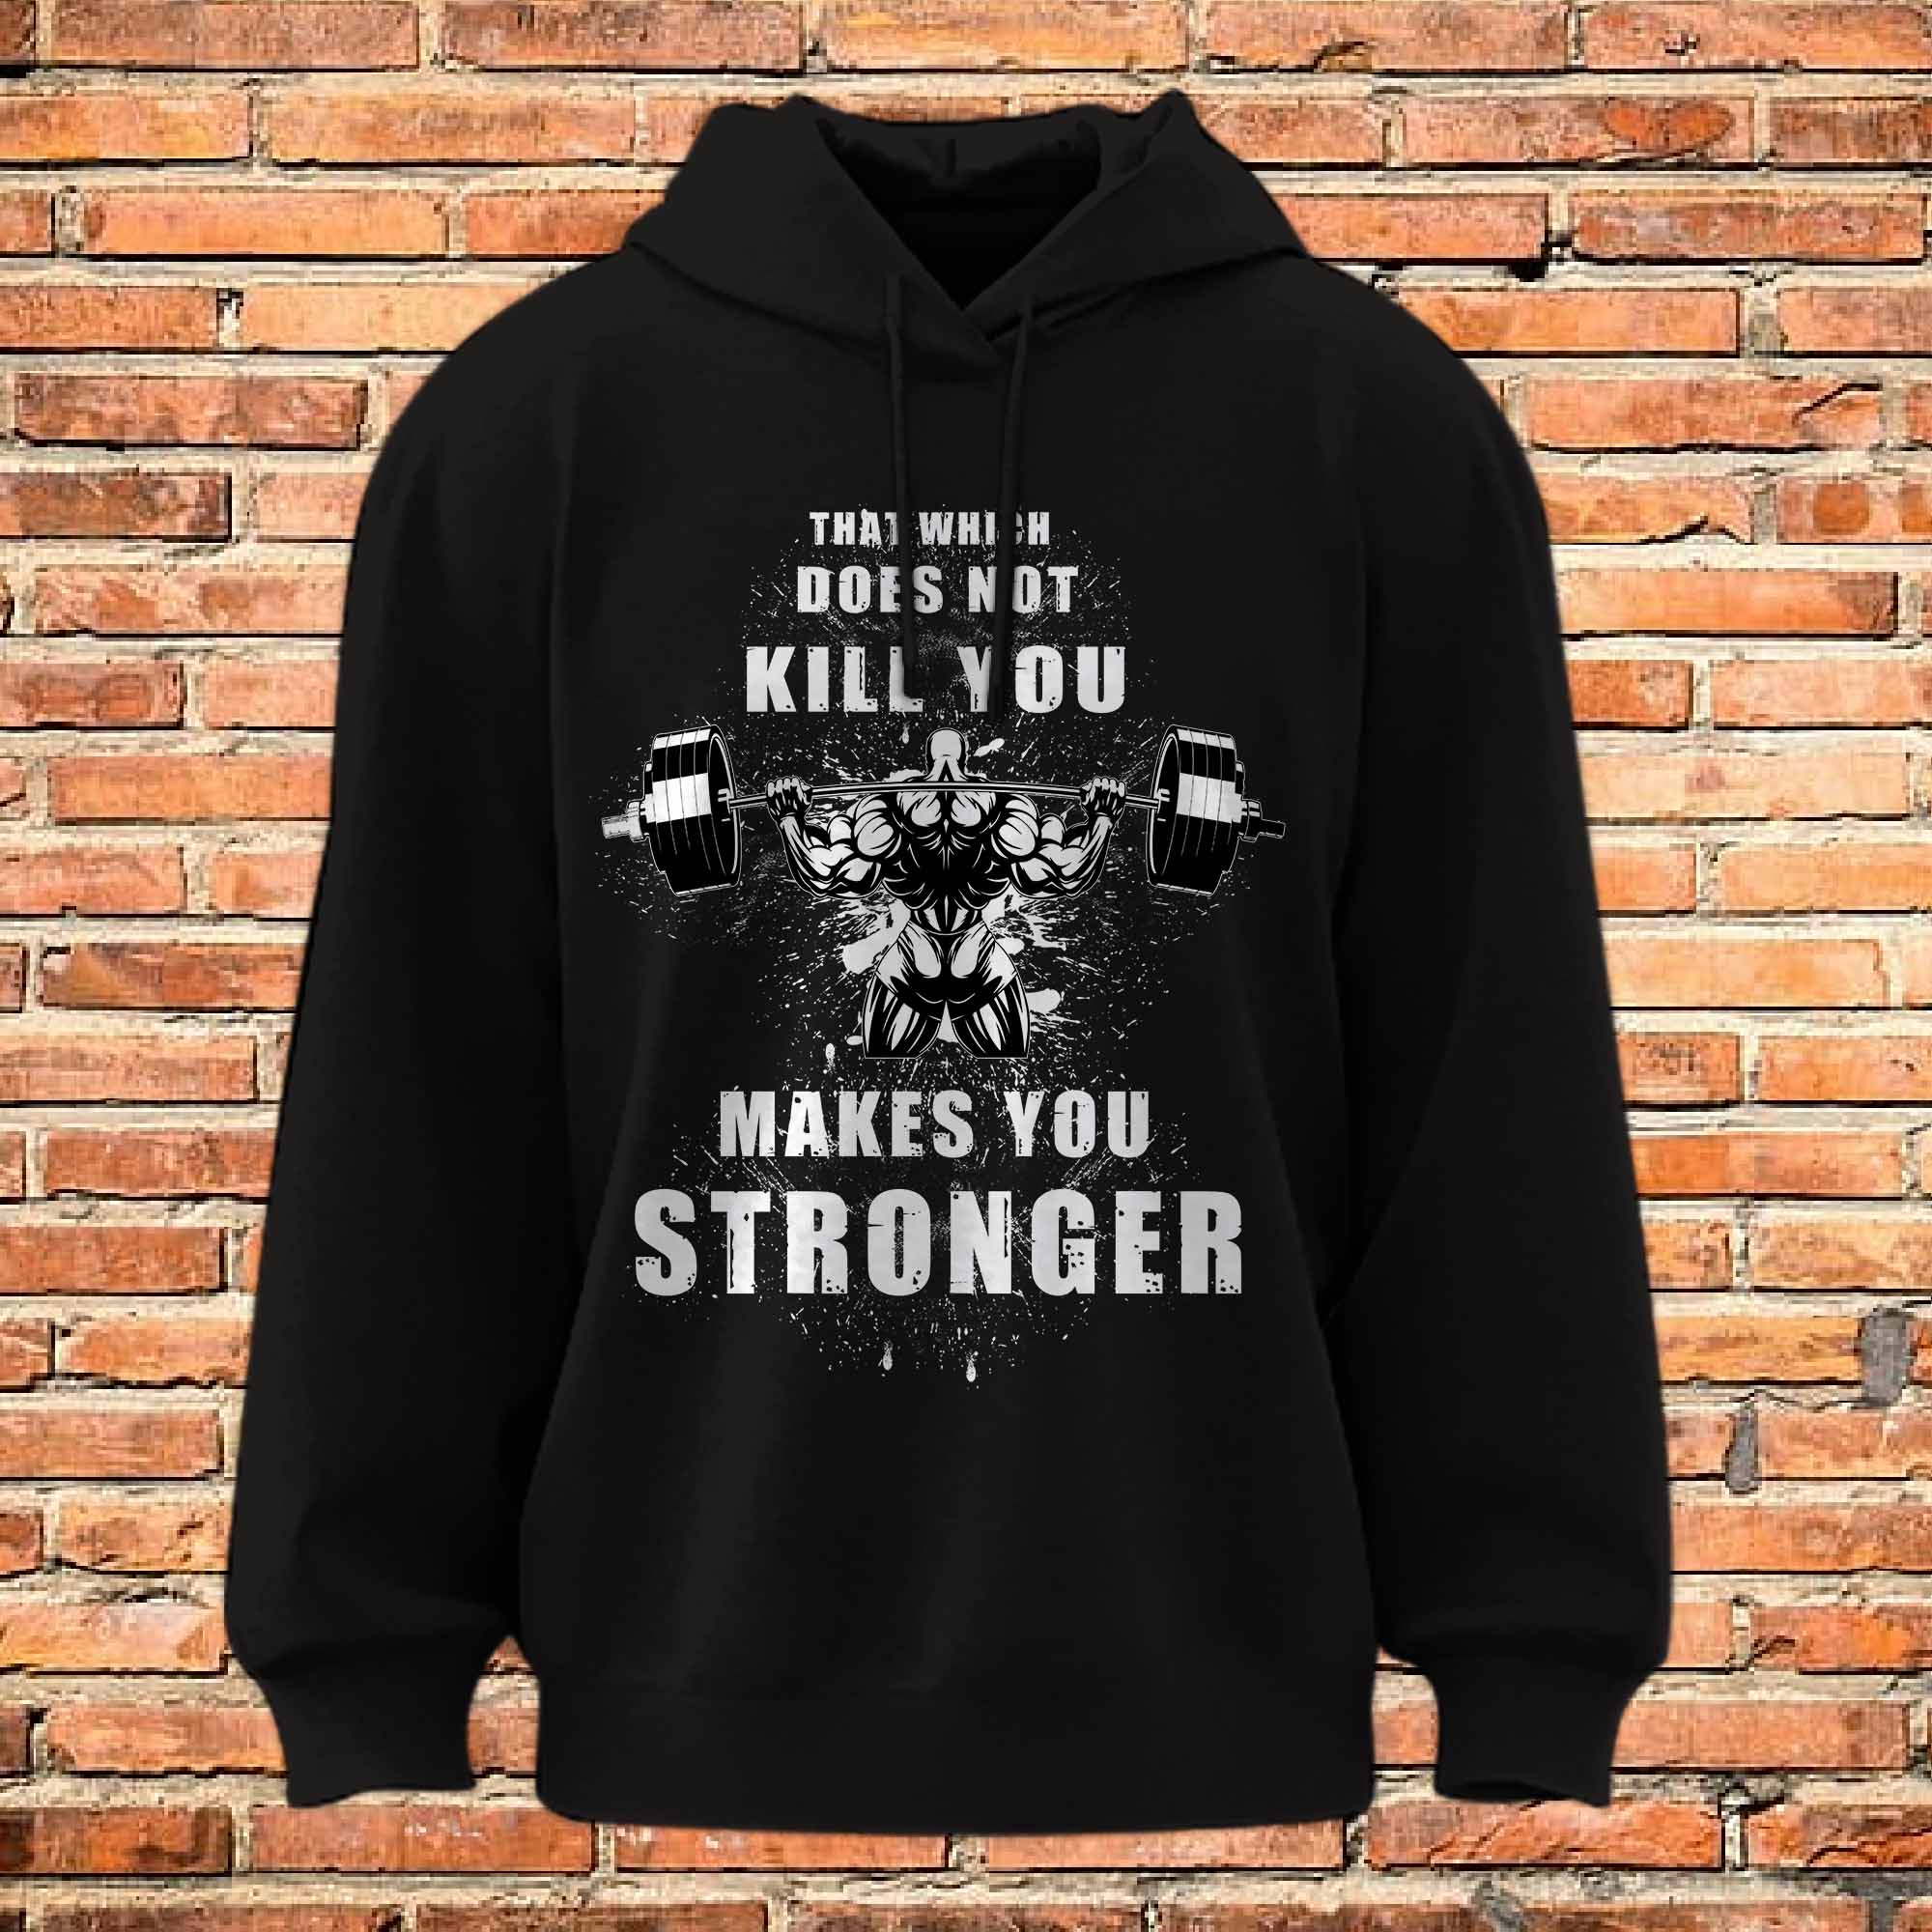 Gym Pump Cover Hoodie Muscle Gorilla Motivational Quotes Saying 11046